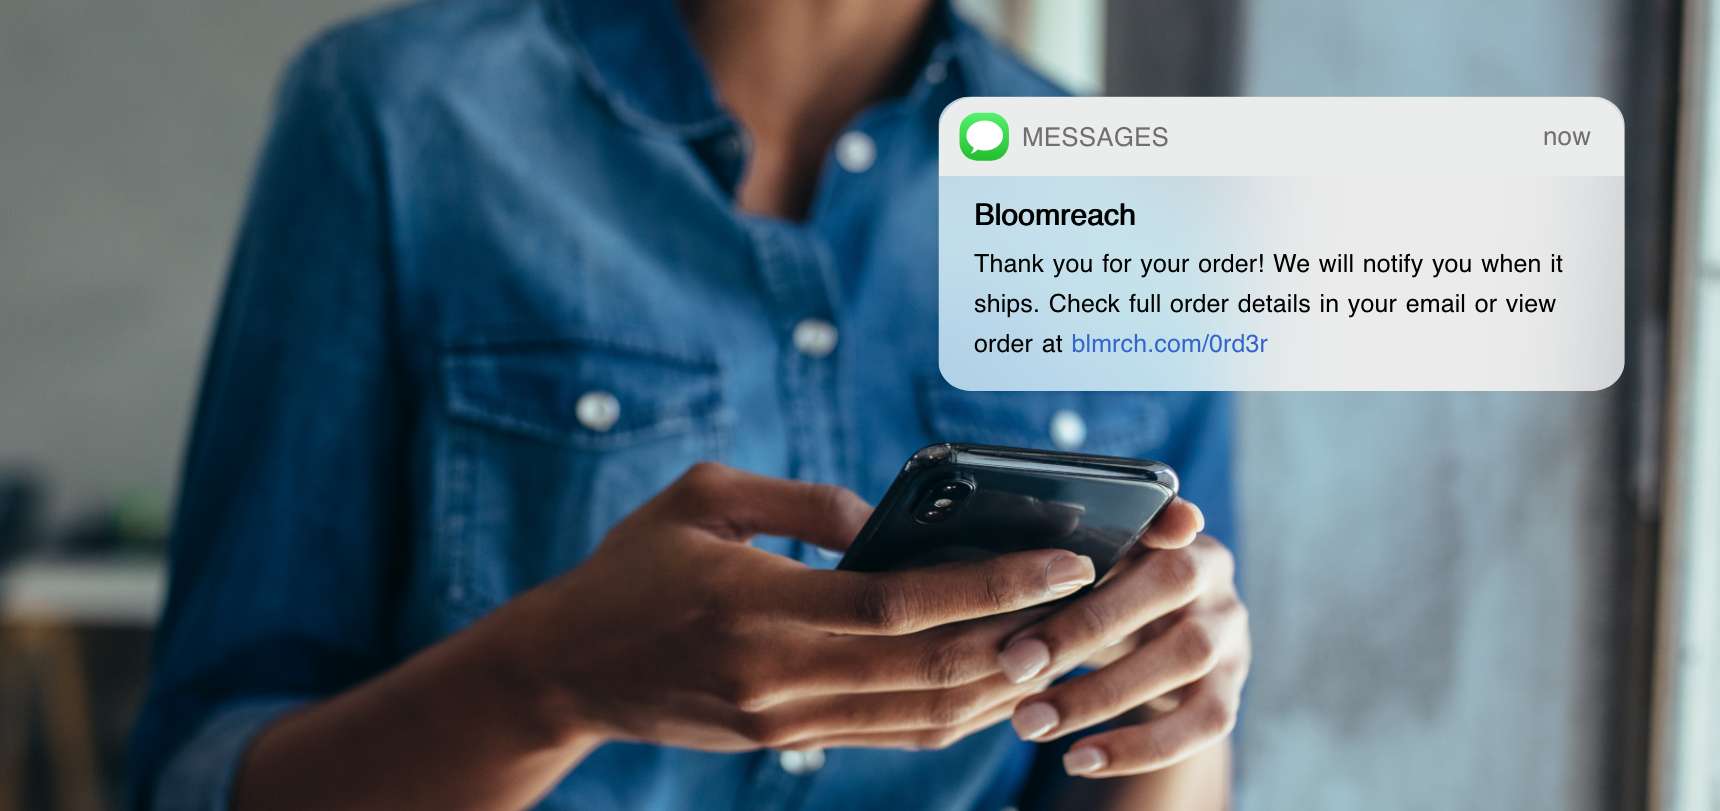 Thank-you SMS messages for completed transactions adds a personal touch to the customer experience